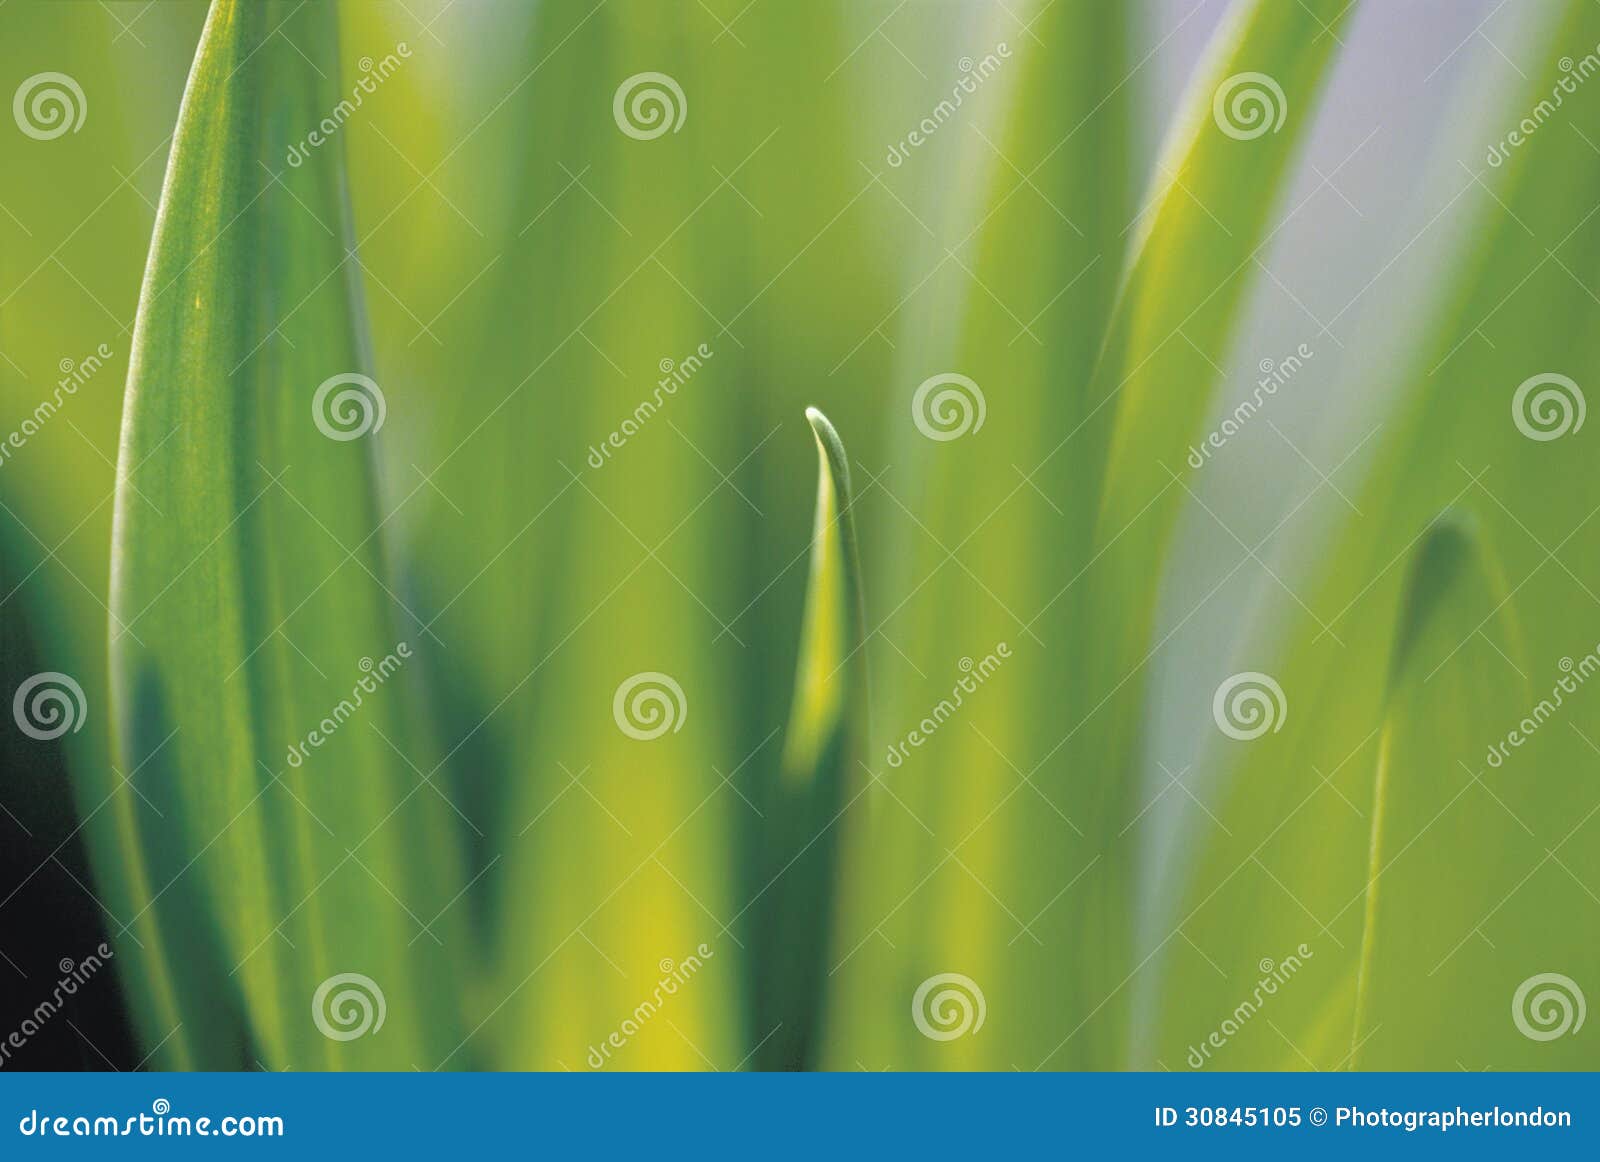 Leaves close up stock image. Image of closeup, nature - 30845105